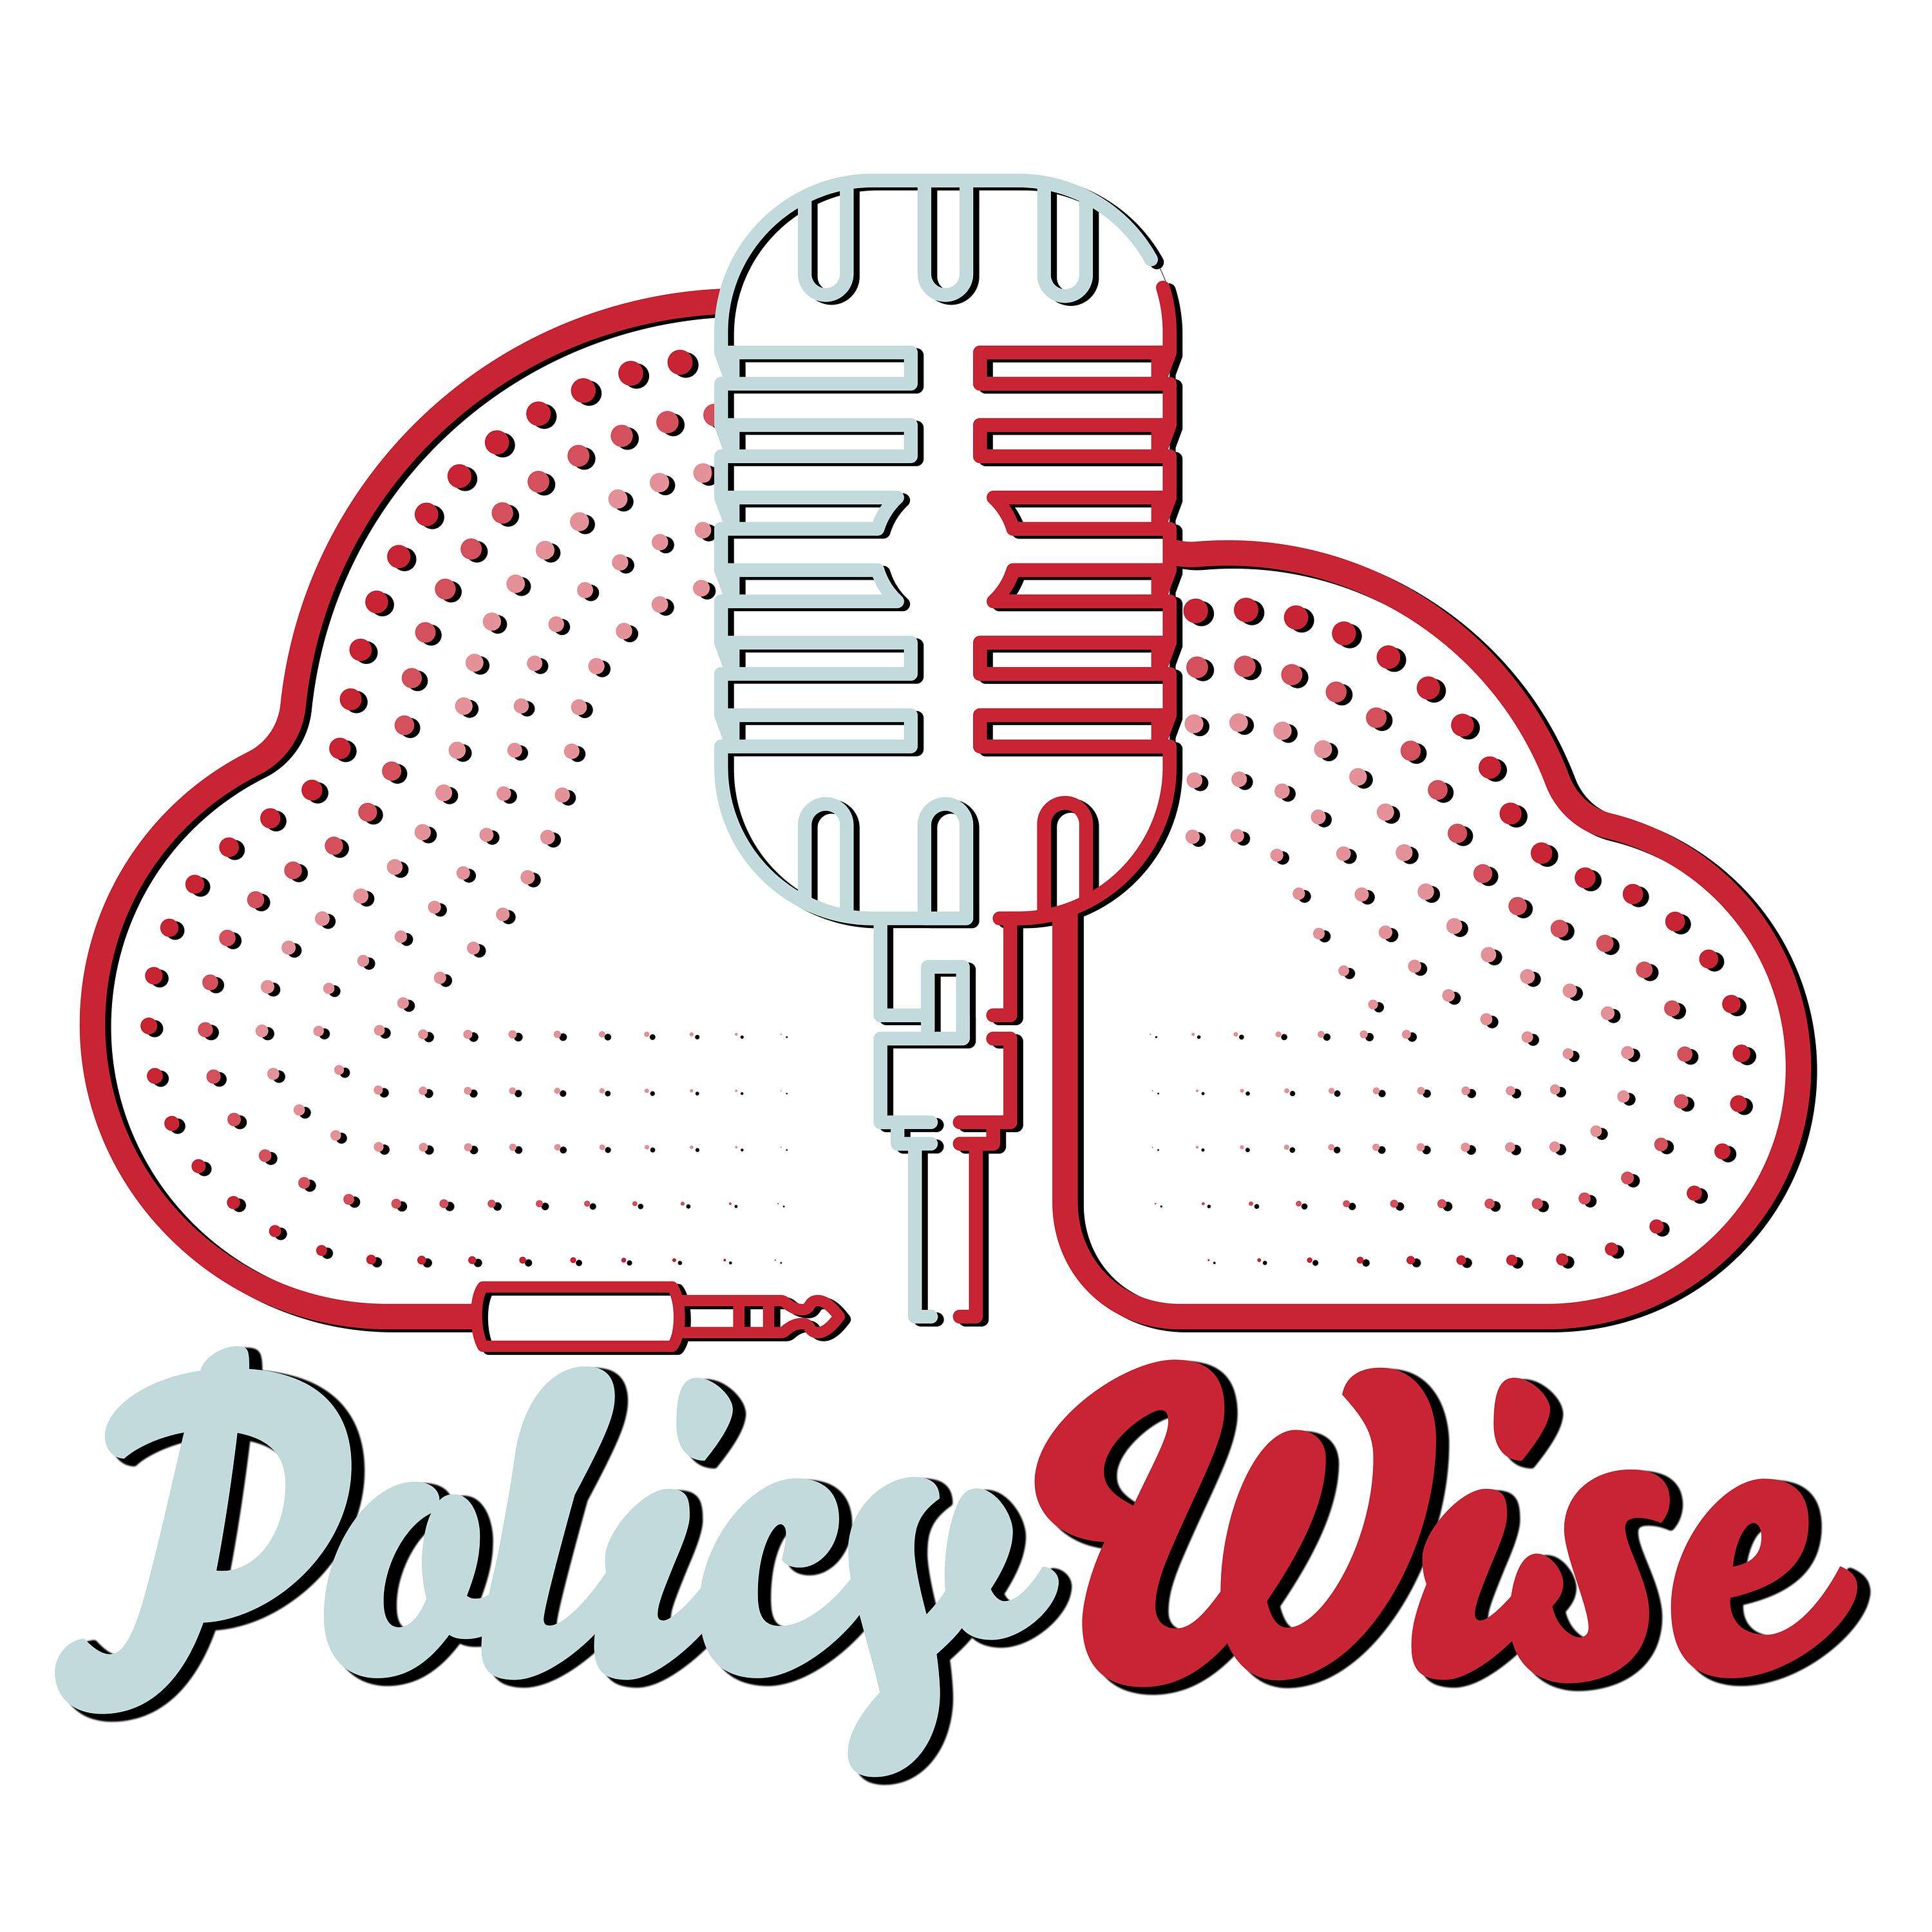 PolicyWise